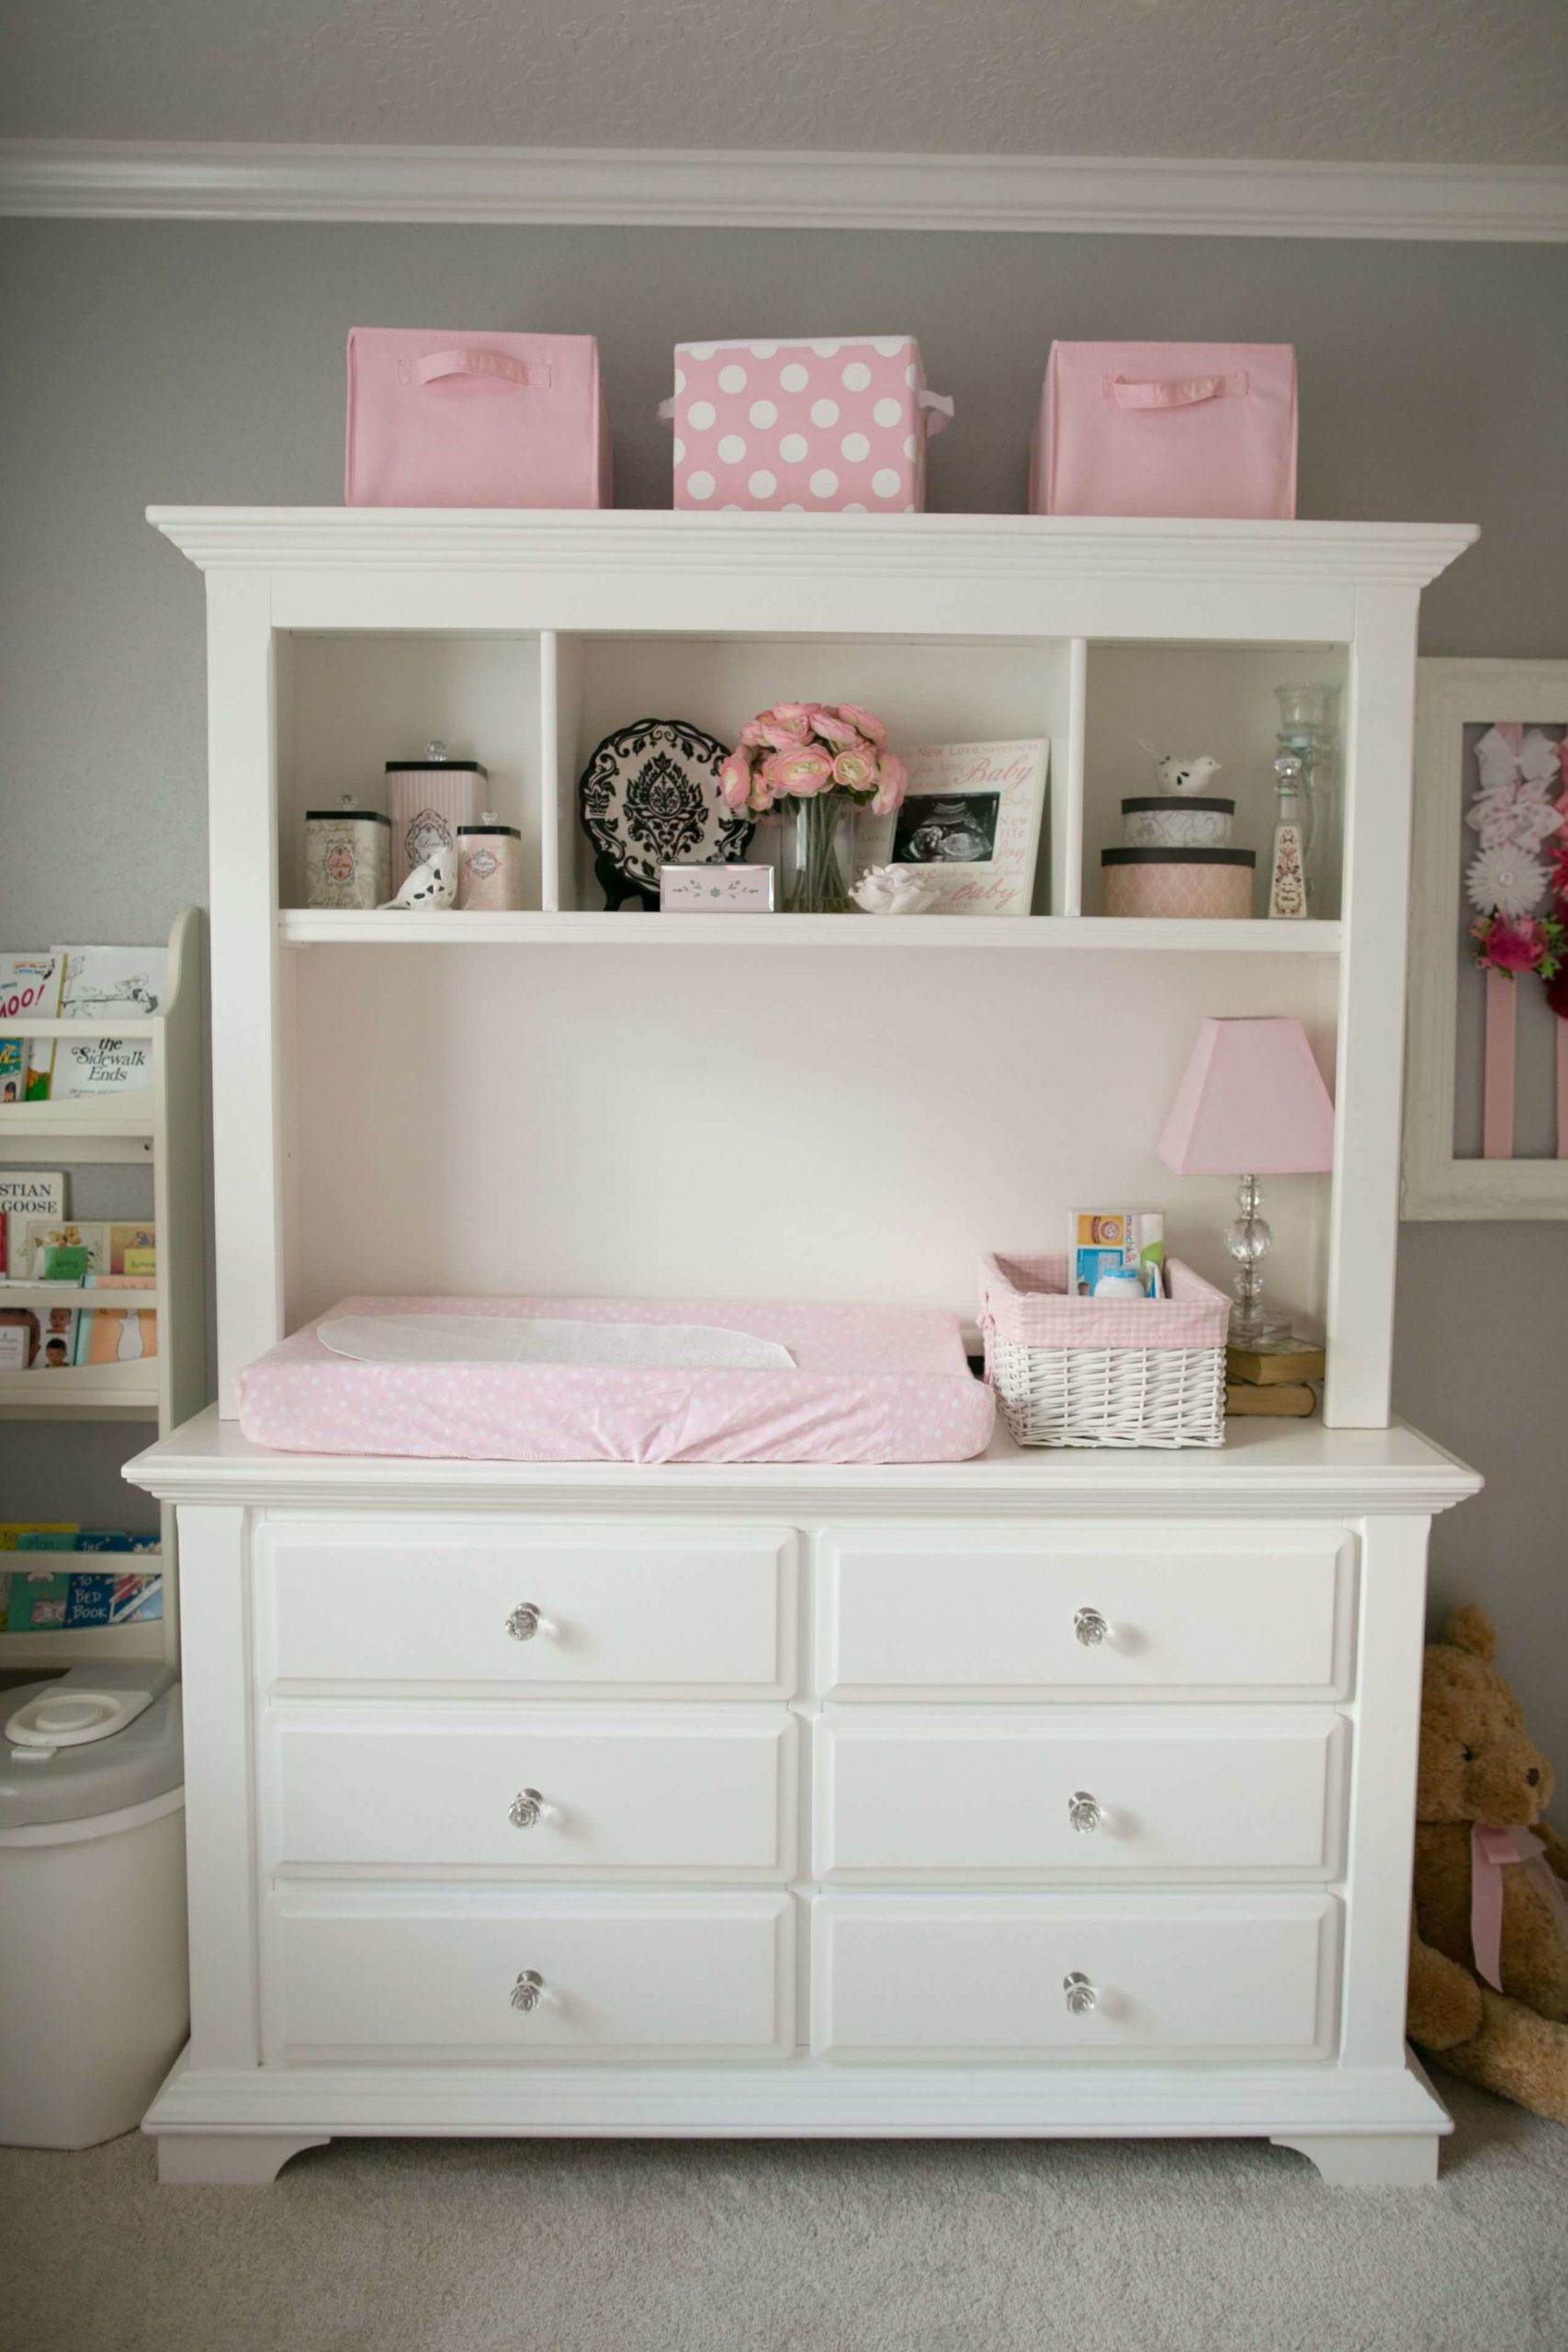 3. An elegant changing table